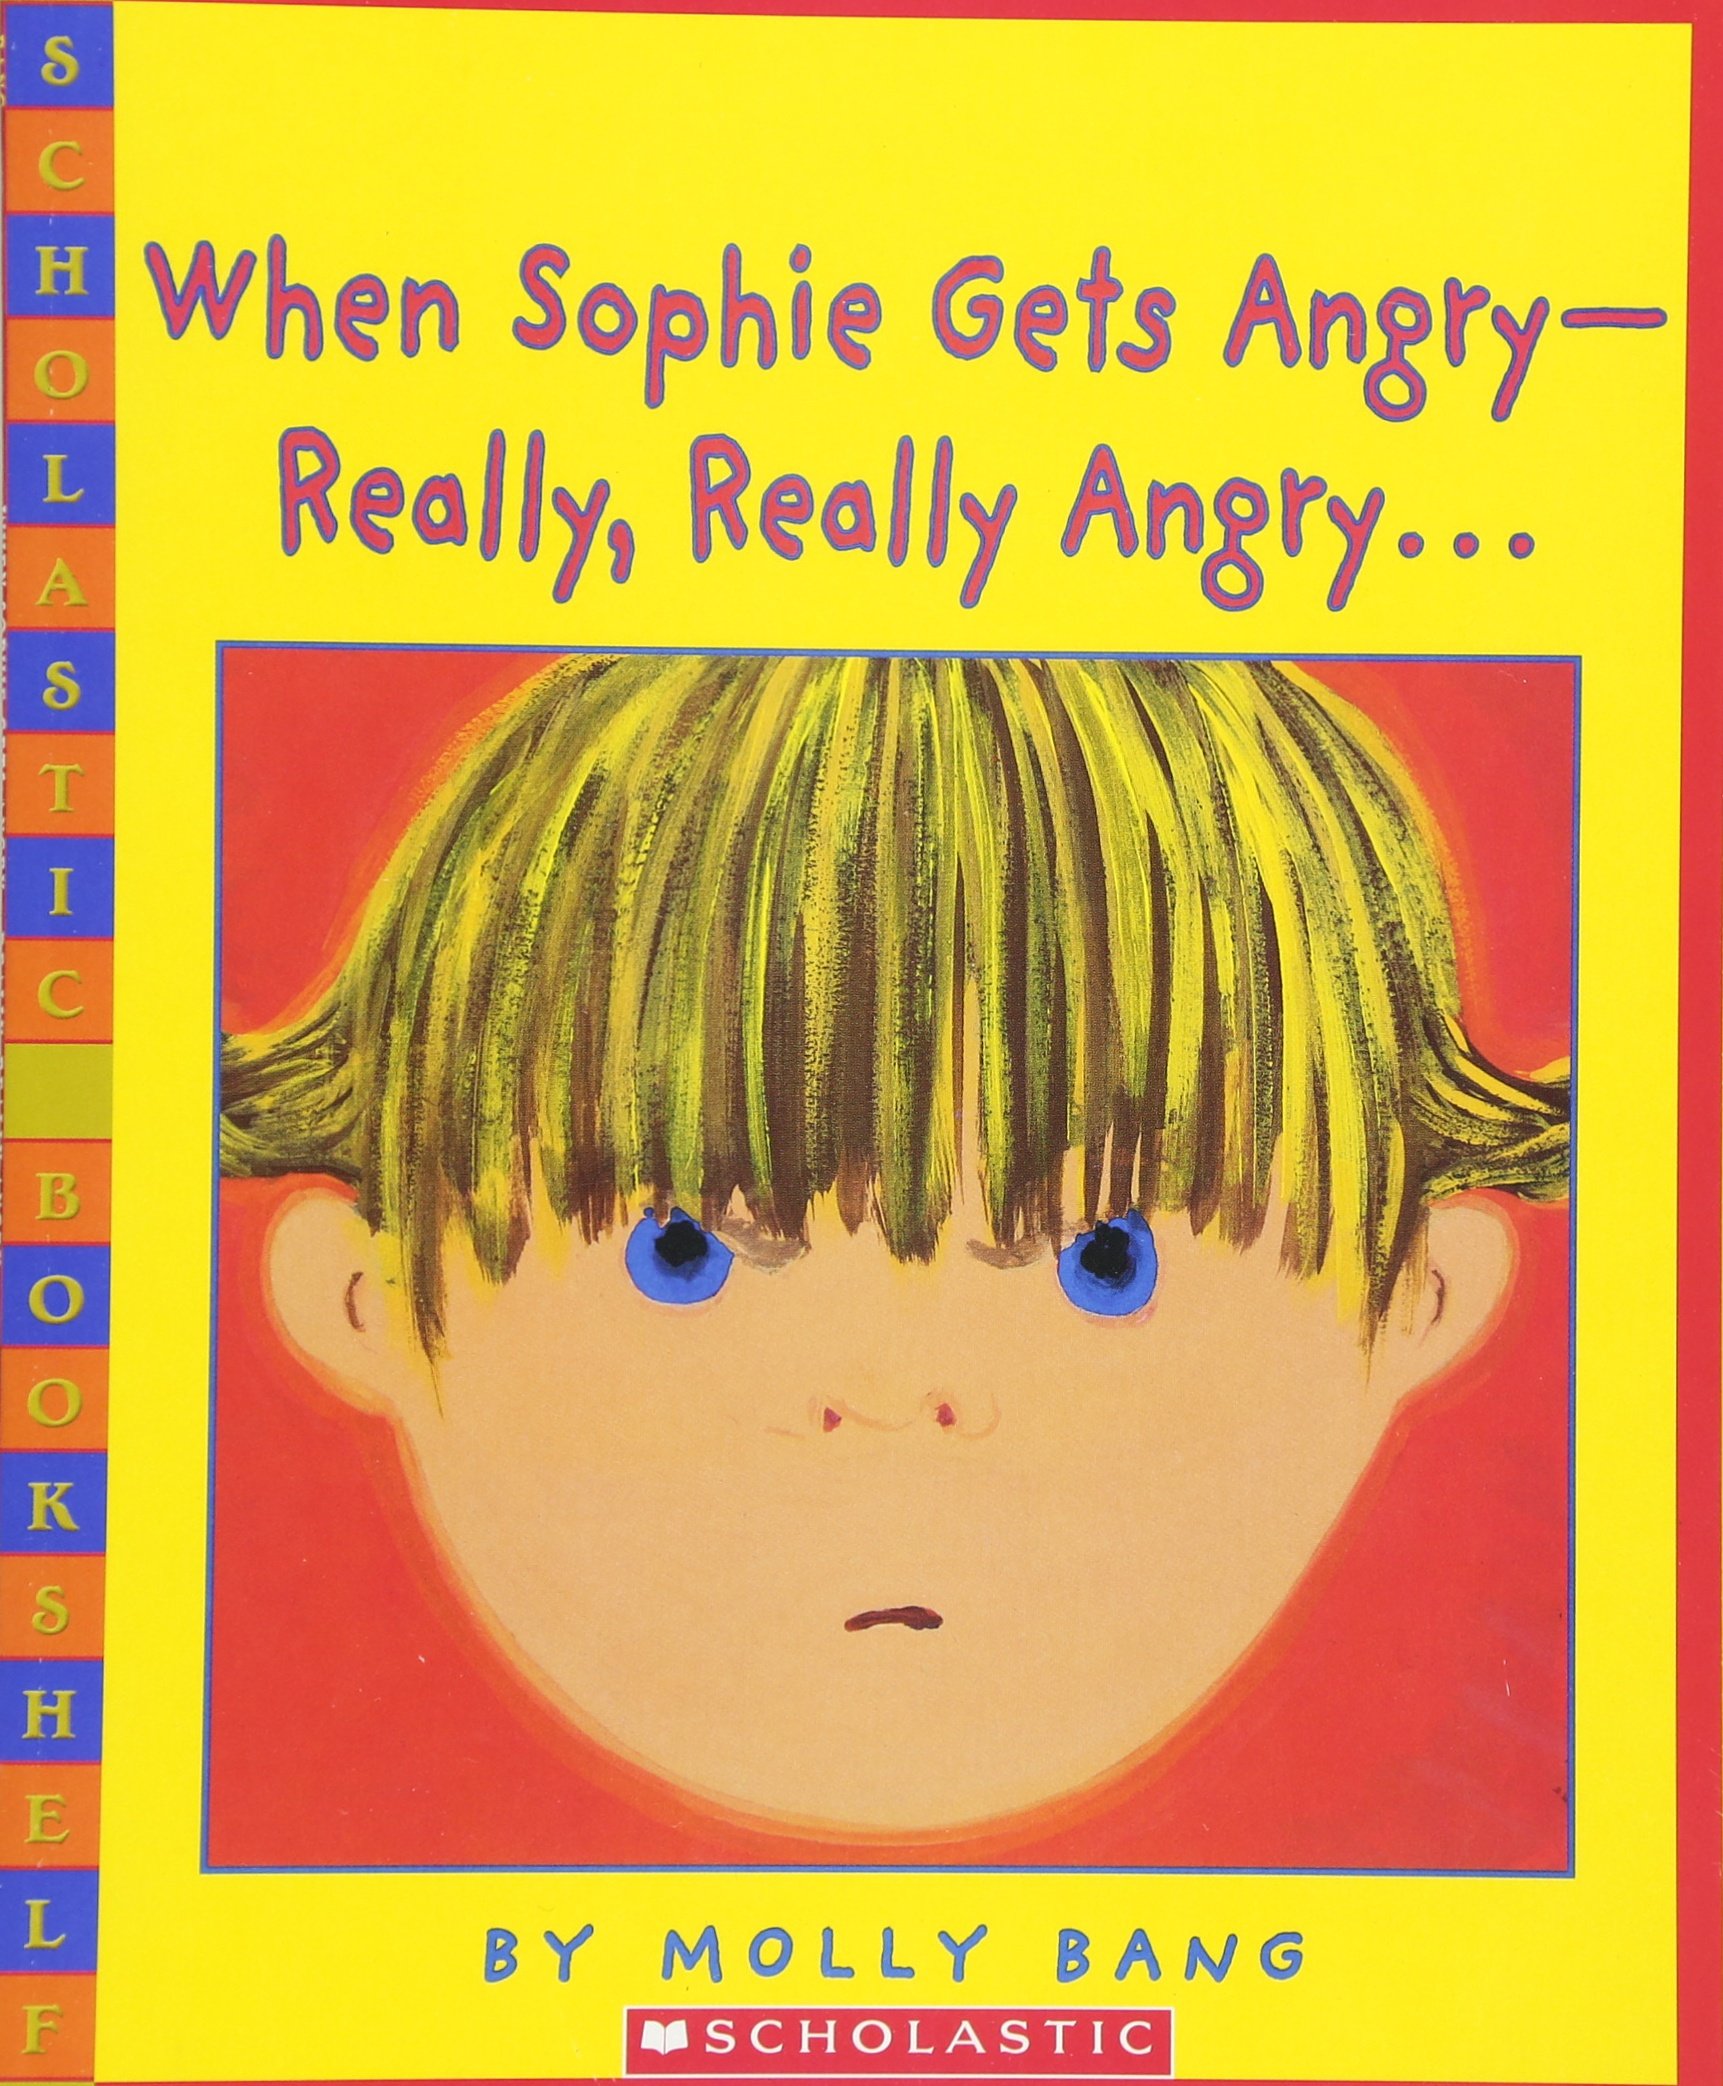 Sophie Gets Angry